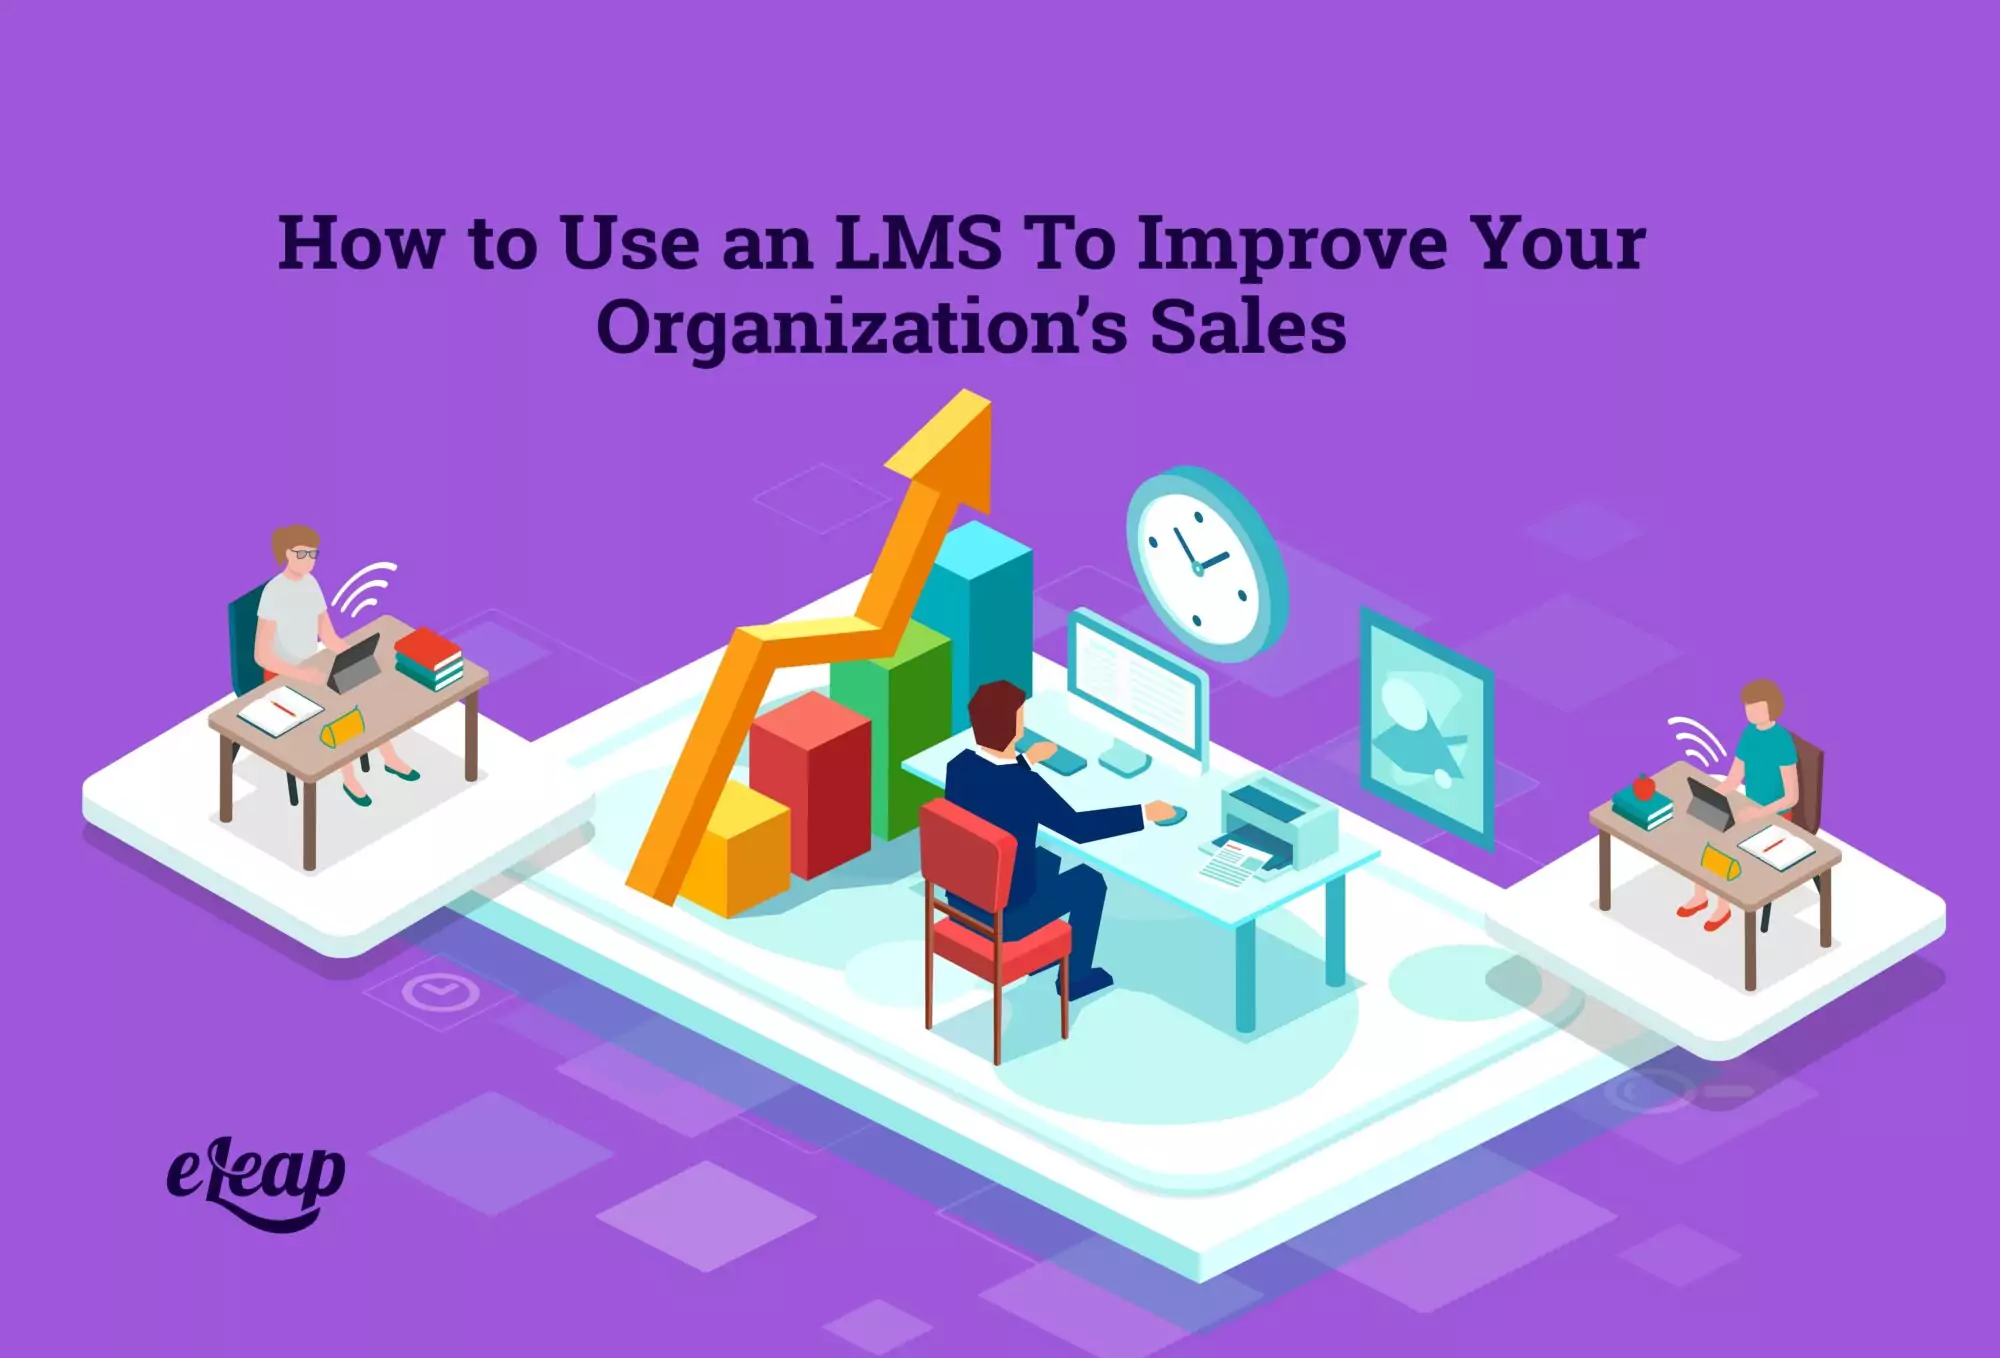 How to Use an LMS To Improve Your Organization's Sales